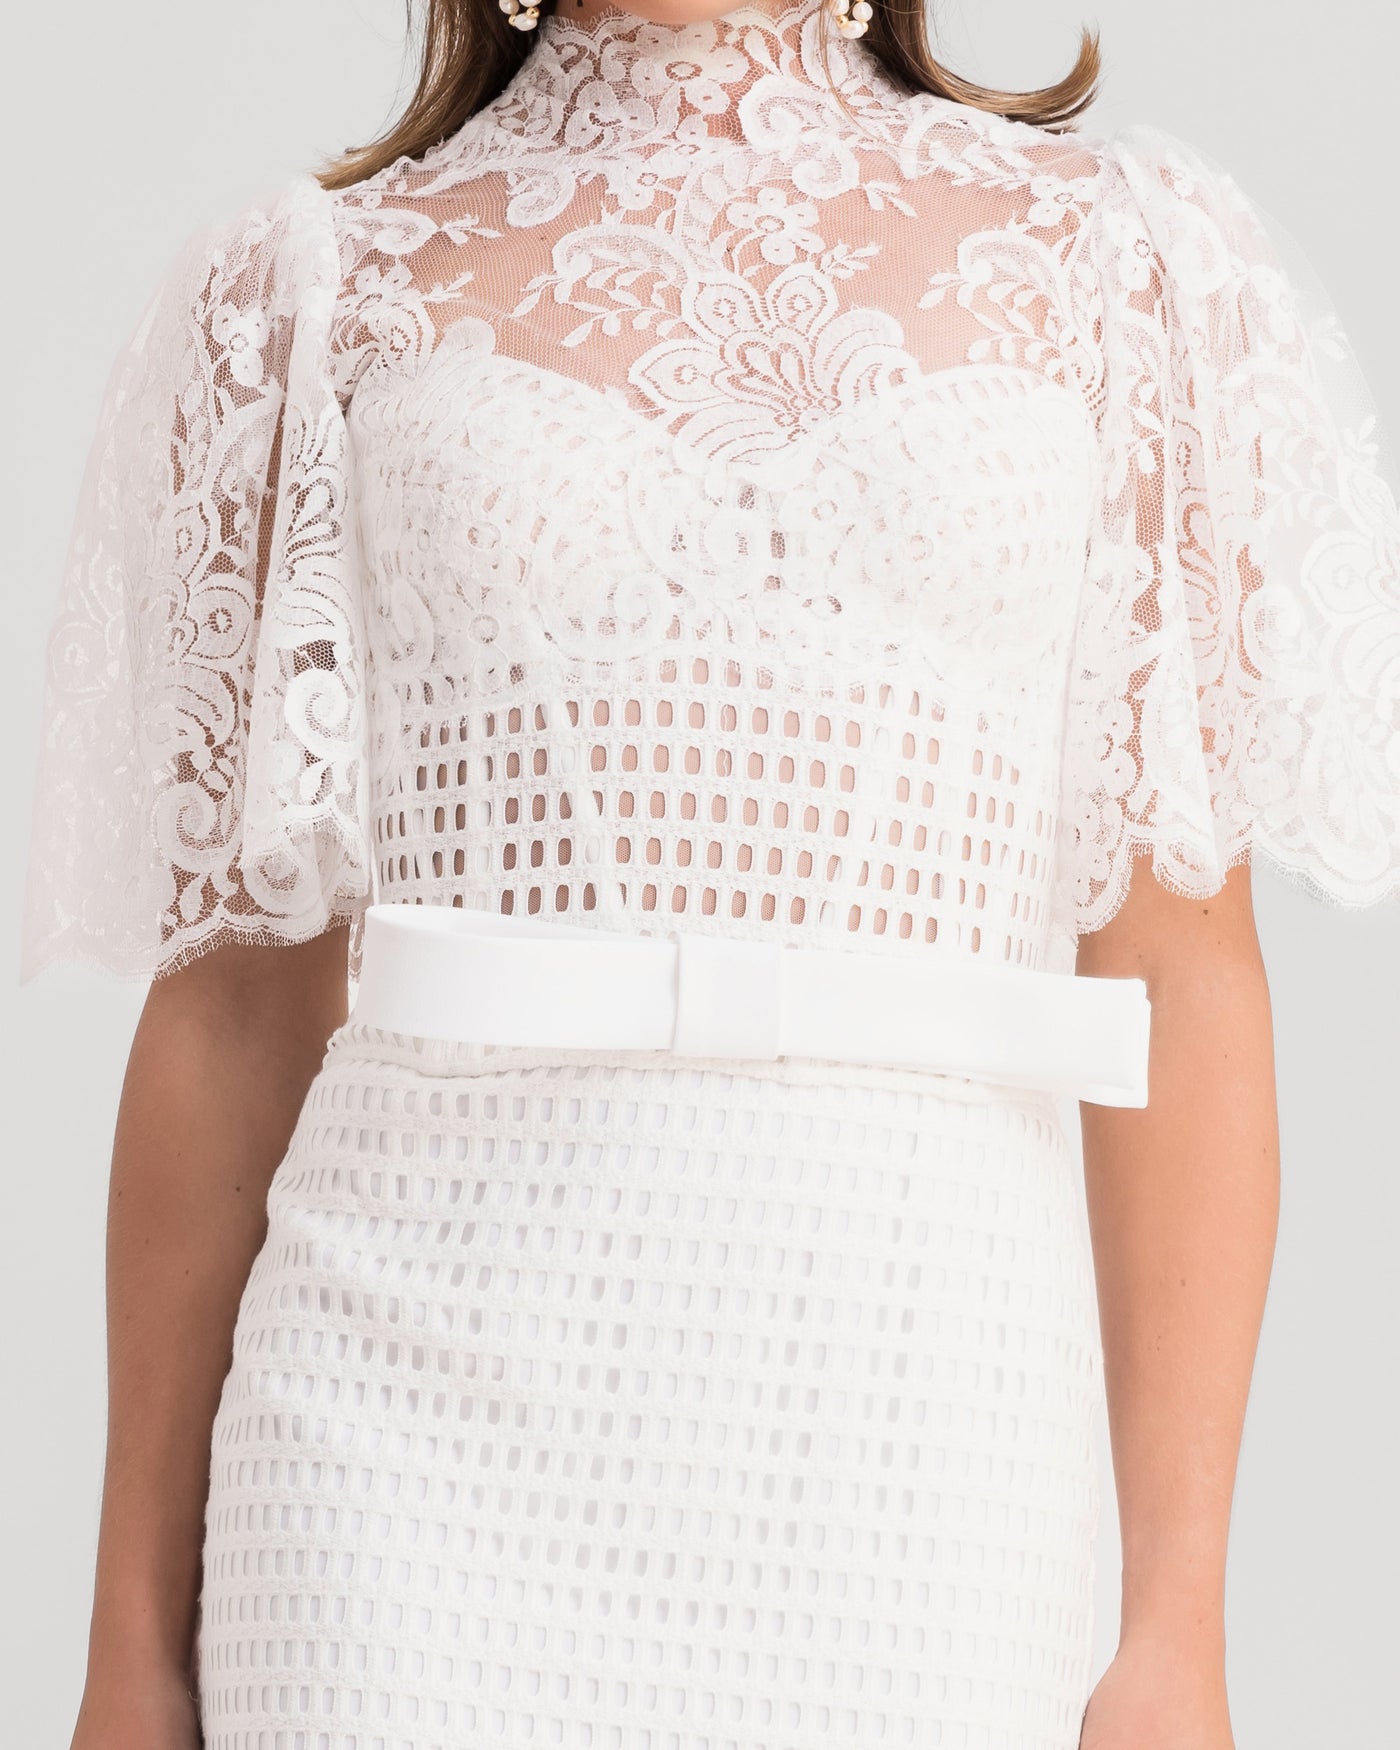 High-Collar Lace Top With Pencil Skirt